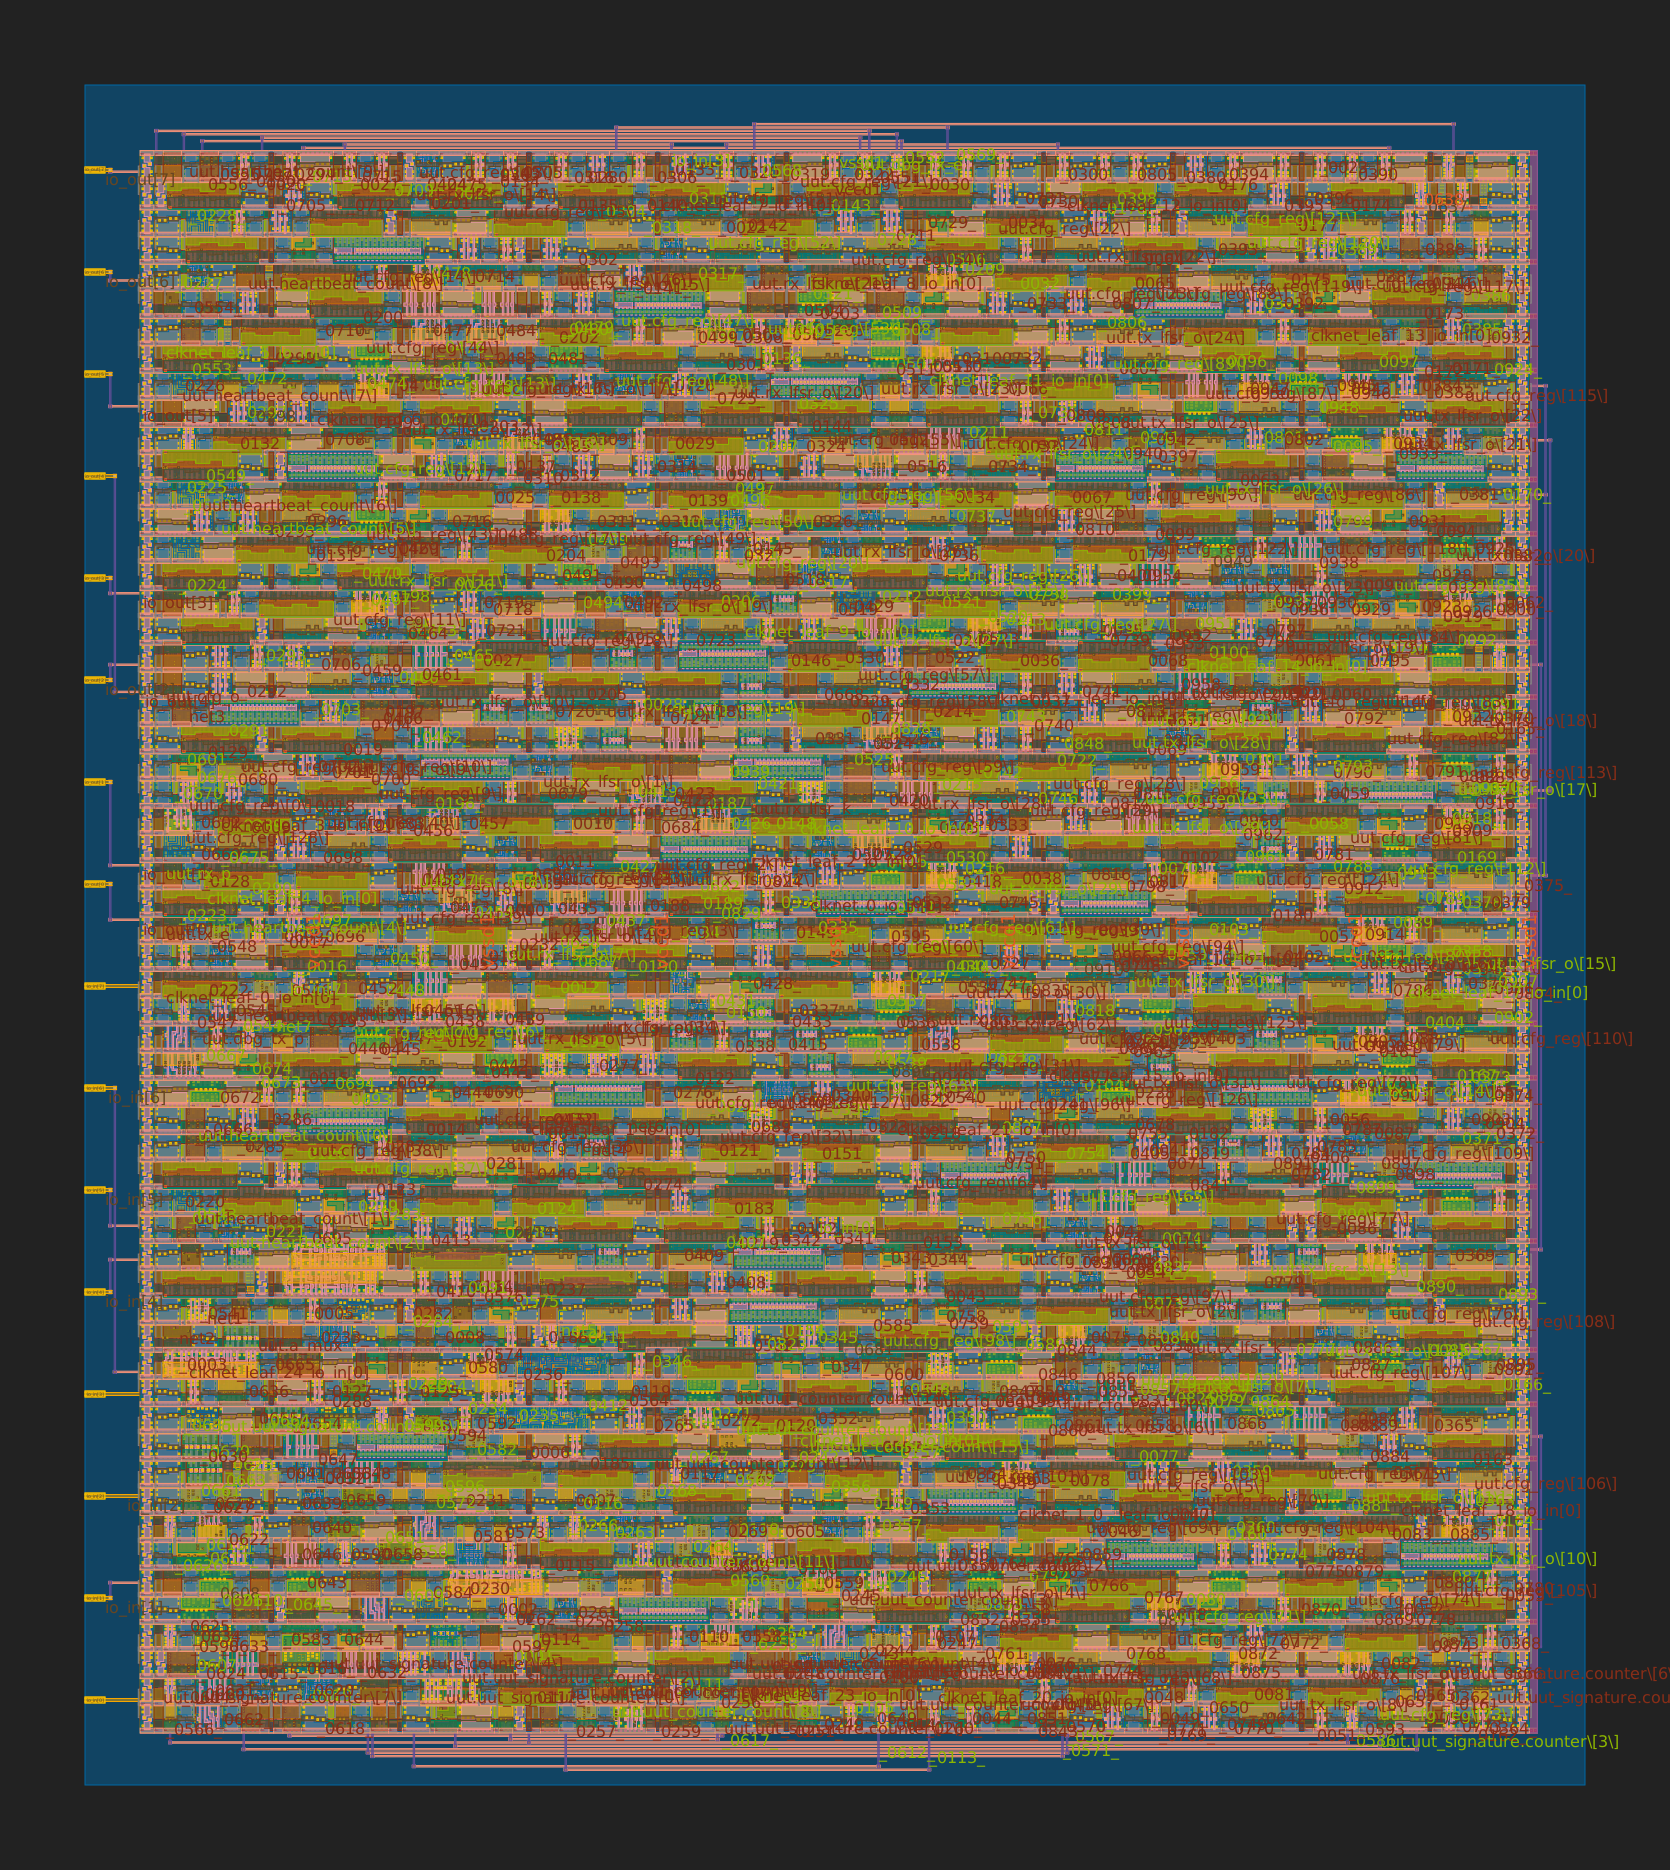 2D preview of the Integrated Circuit (IC)